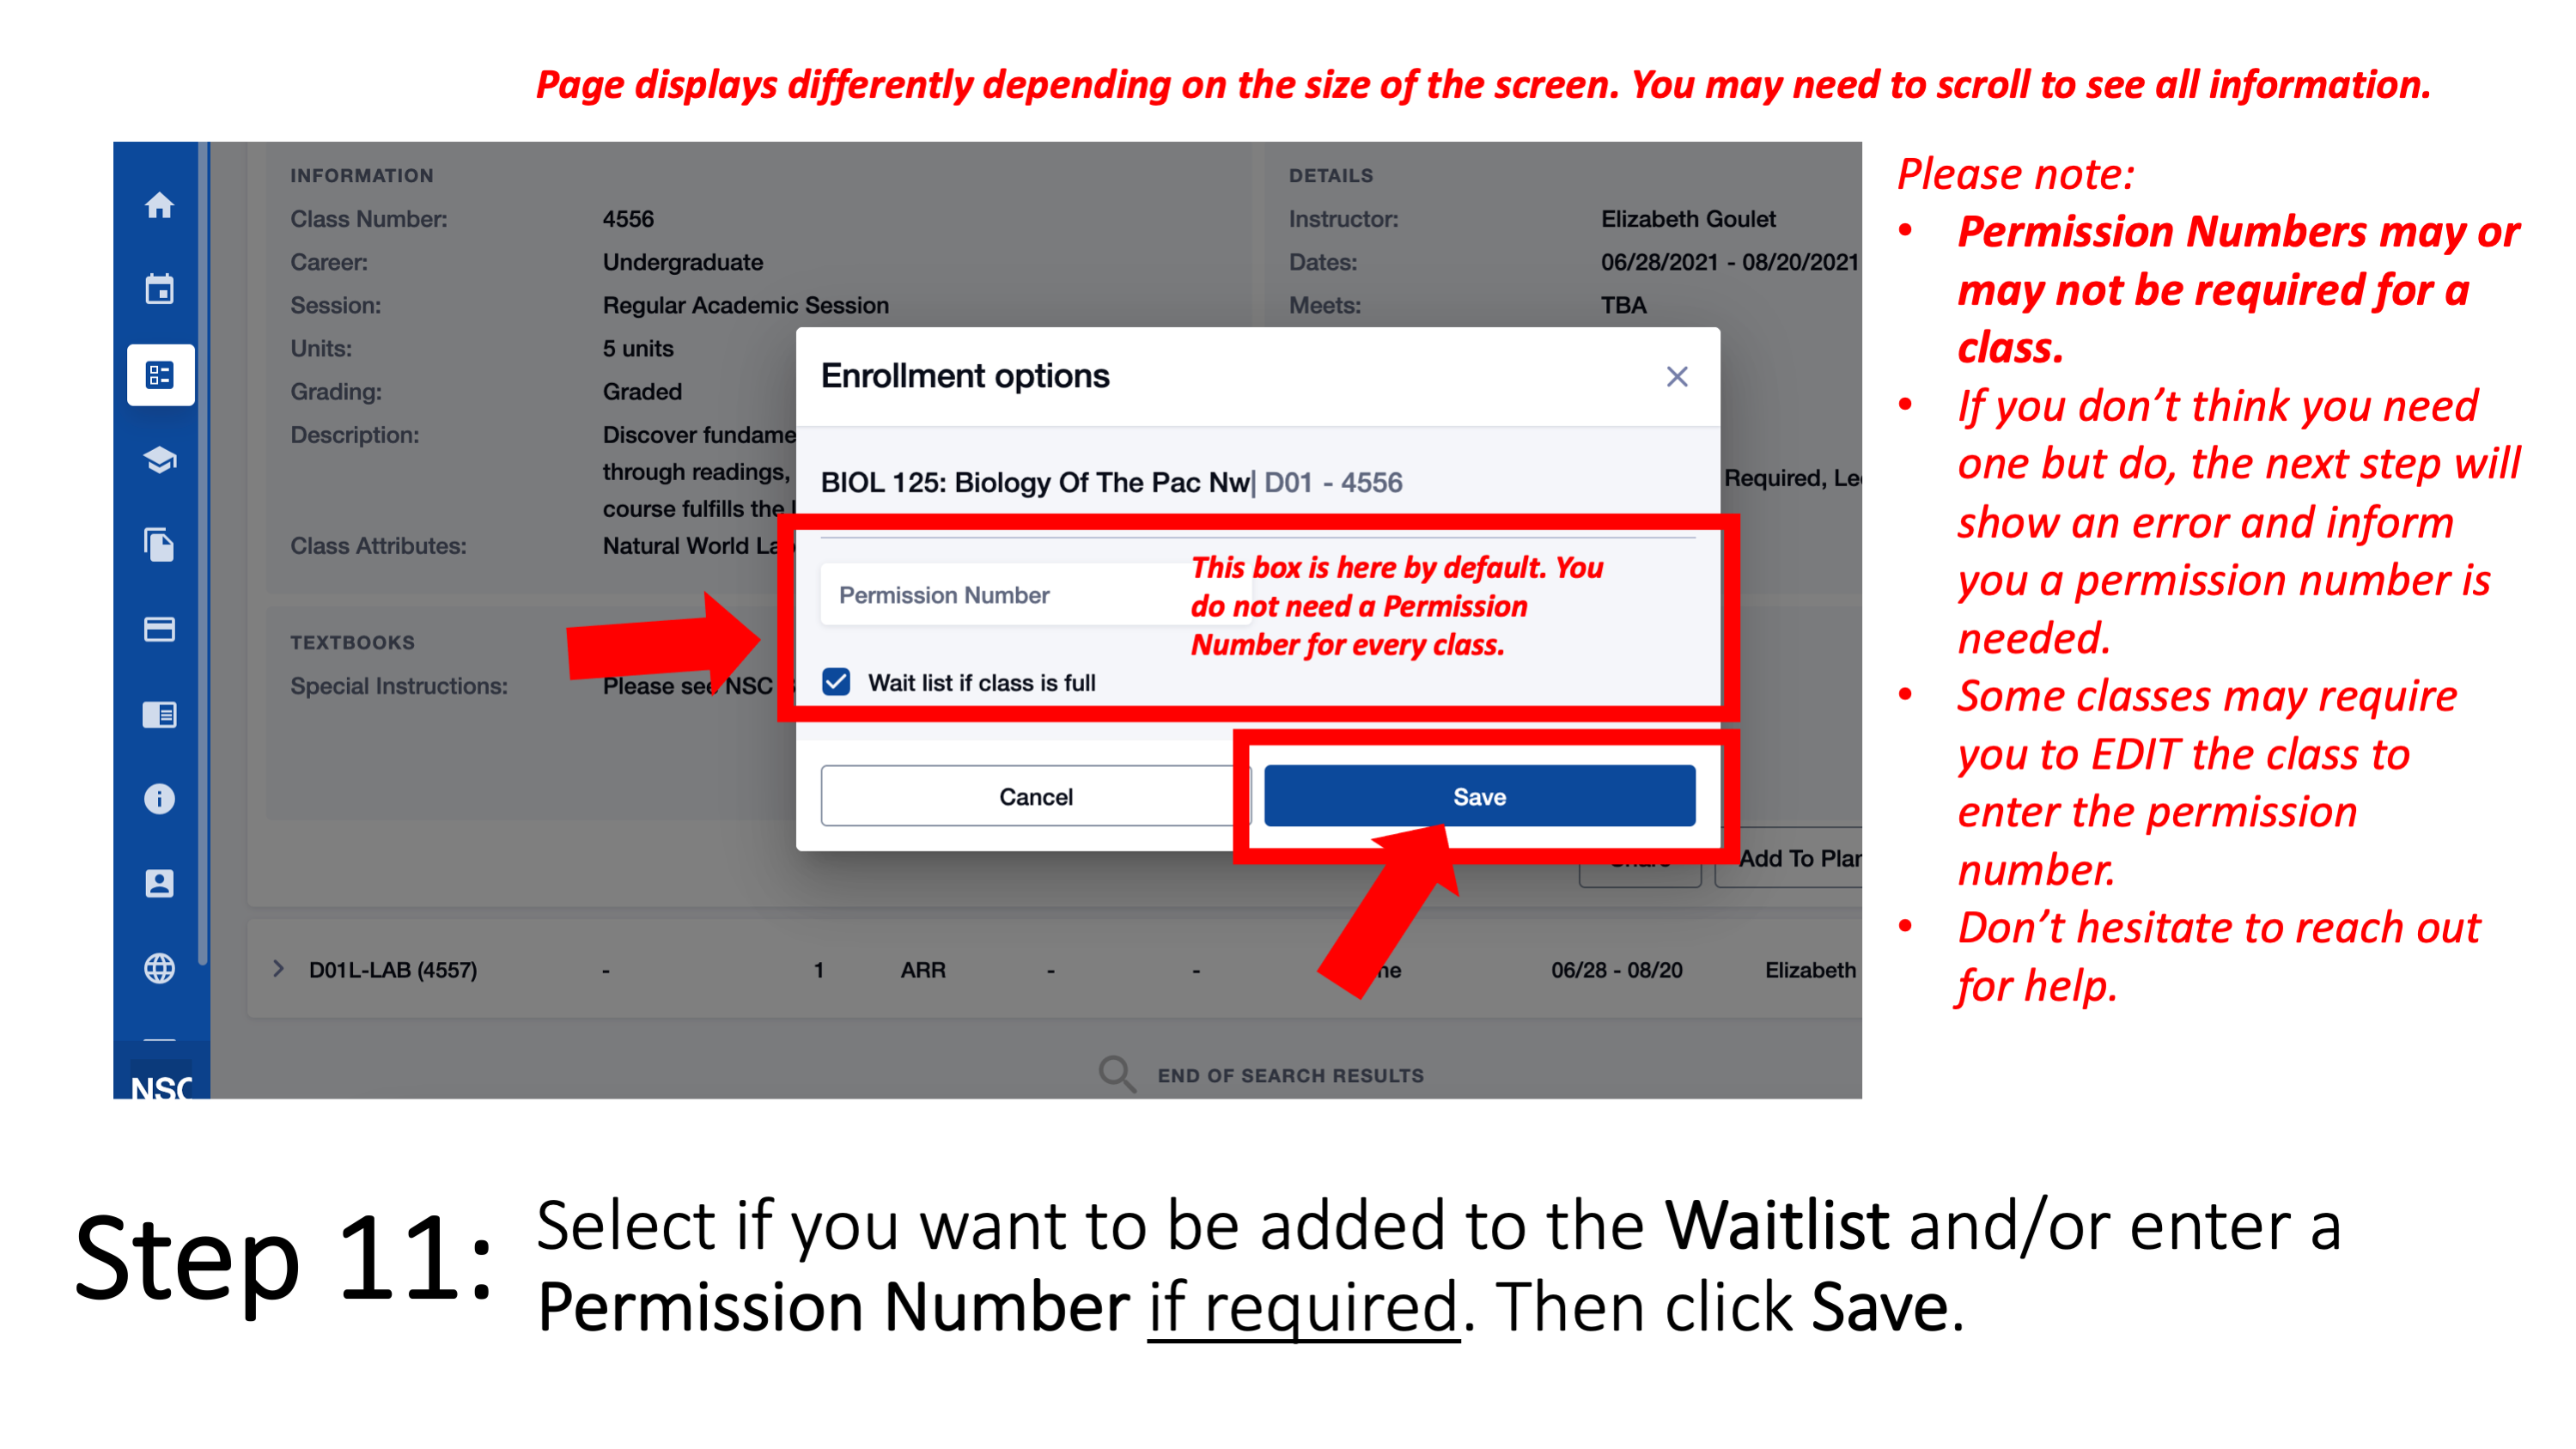 Step 11: Select if you want to be added to the Waitlist and/or enter a Permission Number if required. Then click Save.  Please note: The Permission Number box is here by default.  You do not need one for every class. Permission Numbers may or may not be required for a class. If you don’t think you need one but do, the next step will show an error and inform you a permission number is needed. Some classes may require you to EDIT the class to enter the permission number. Don’t hesitate to reach out for help. 